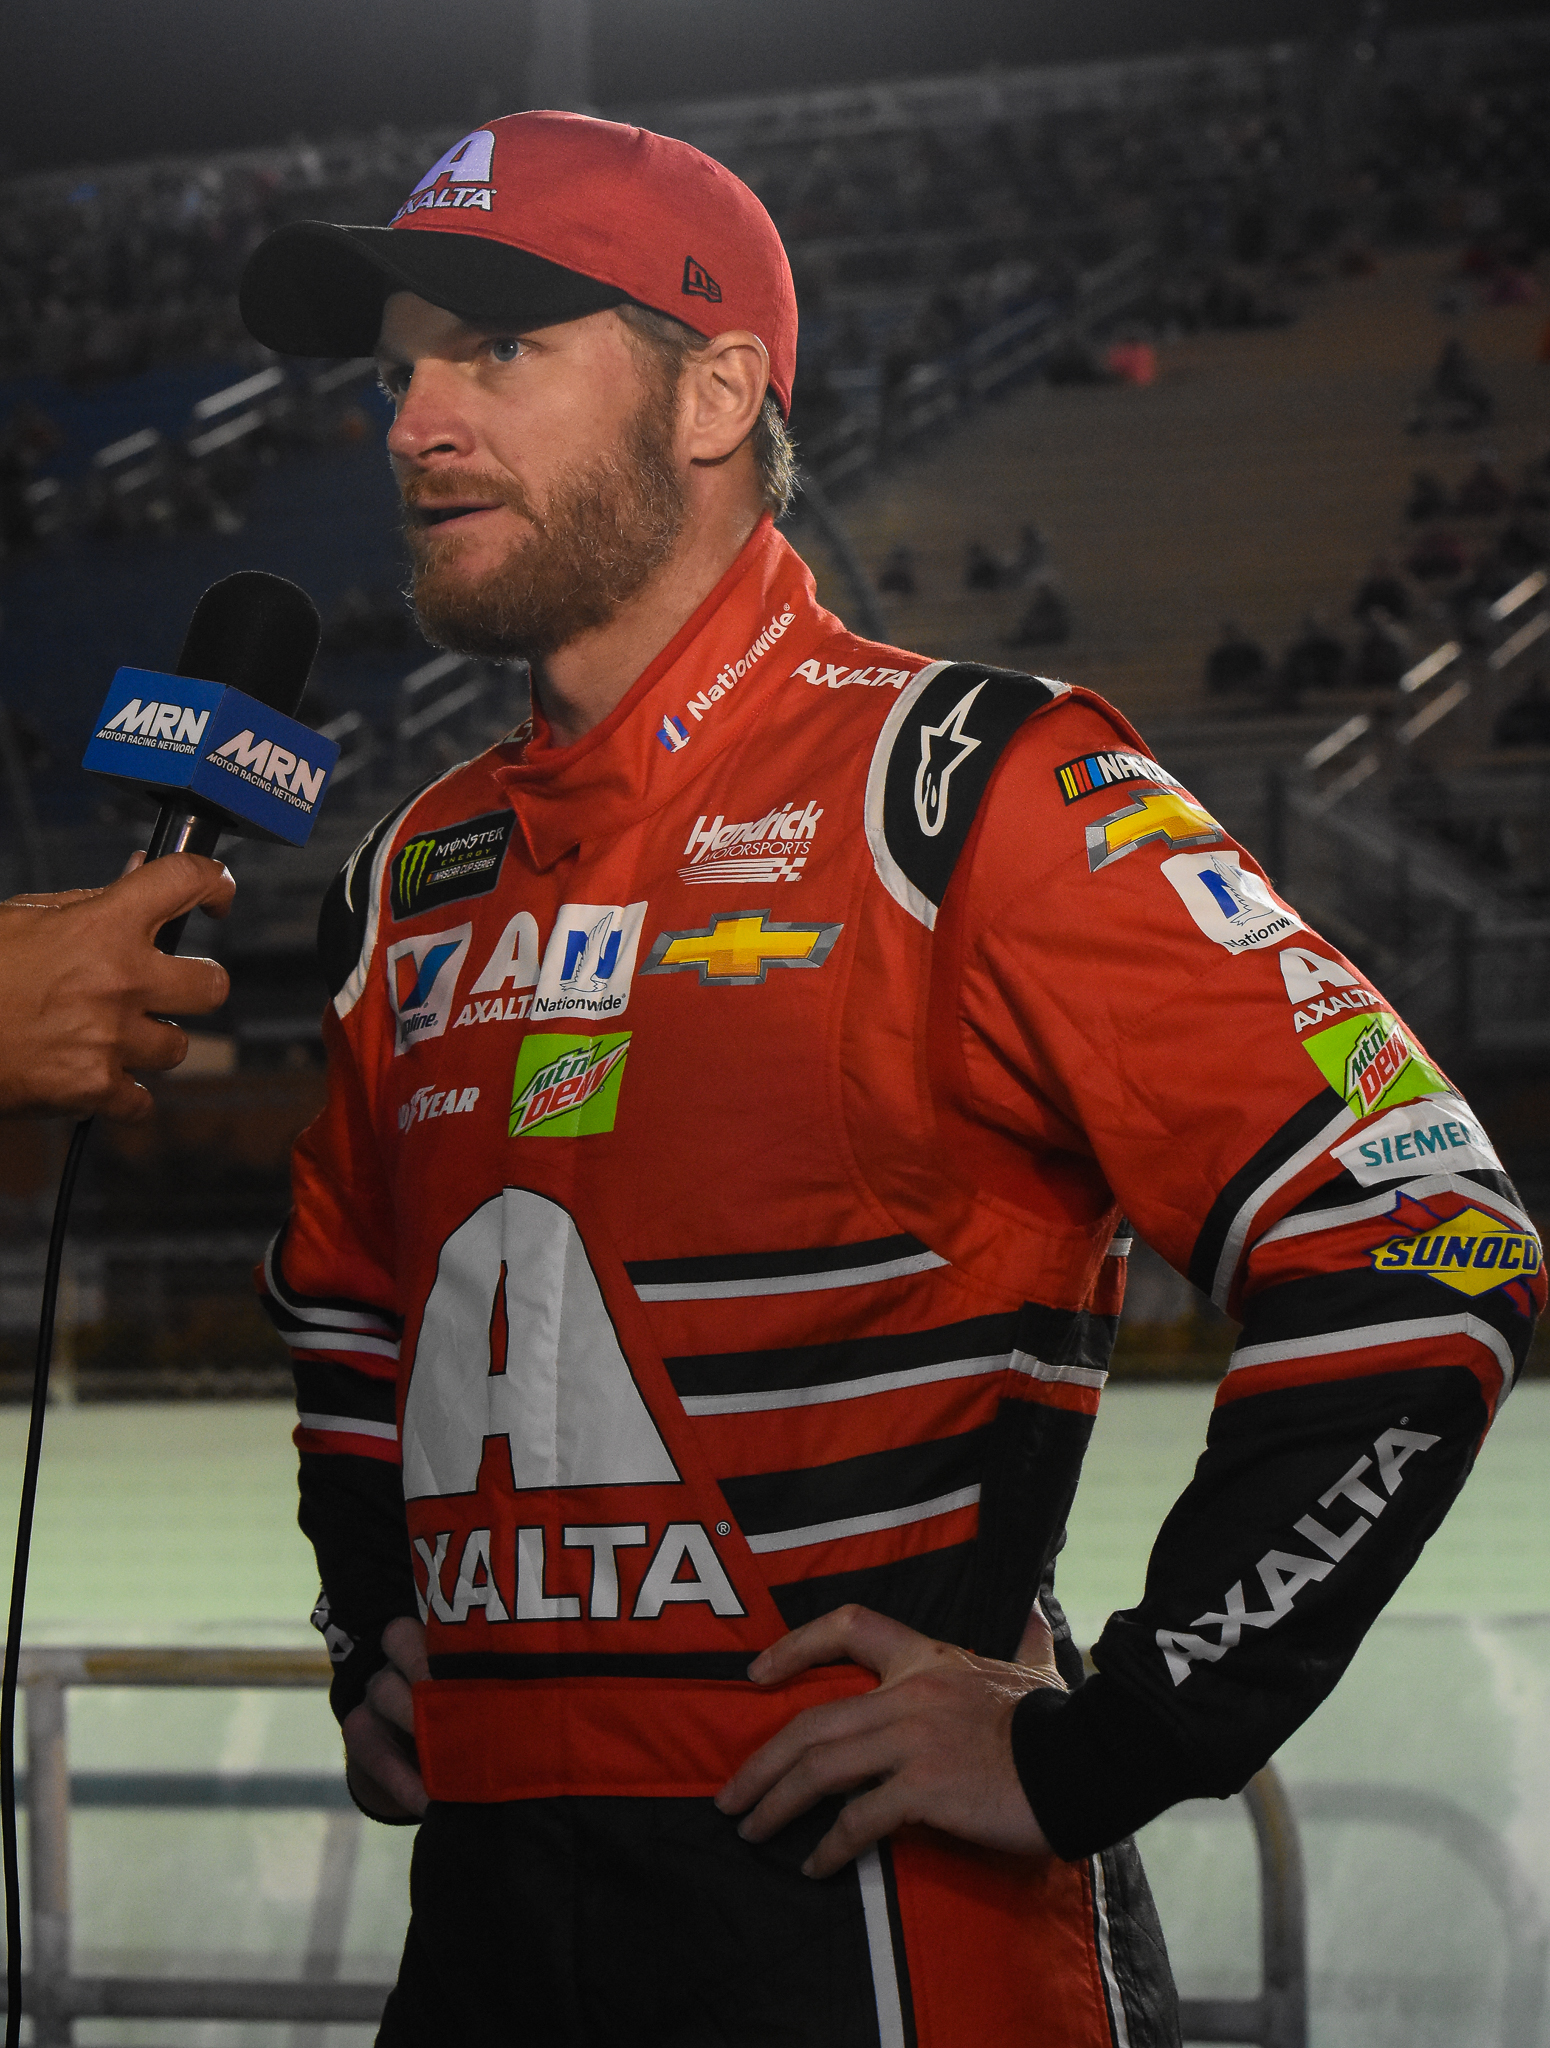 Third generation racer Dale Earnhardt Jr seems at peace with his final season in Cup. (Photo Credit: Jeremy Thompson)